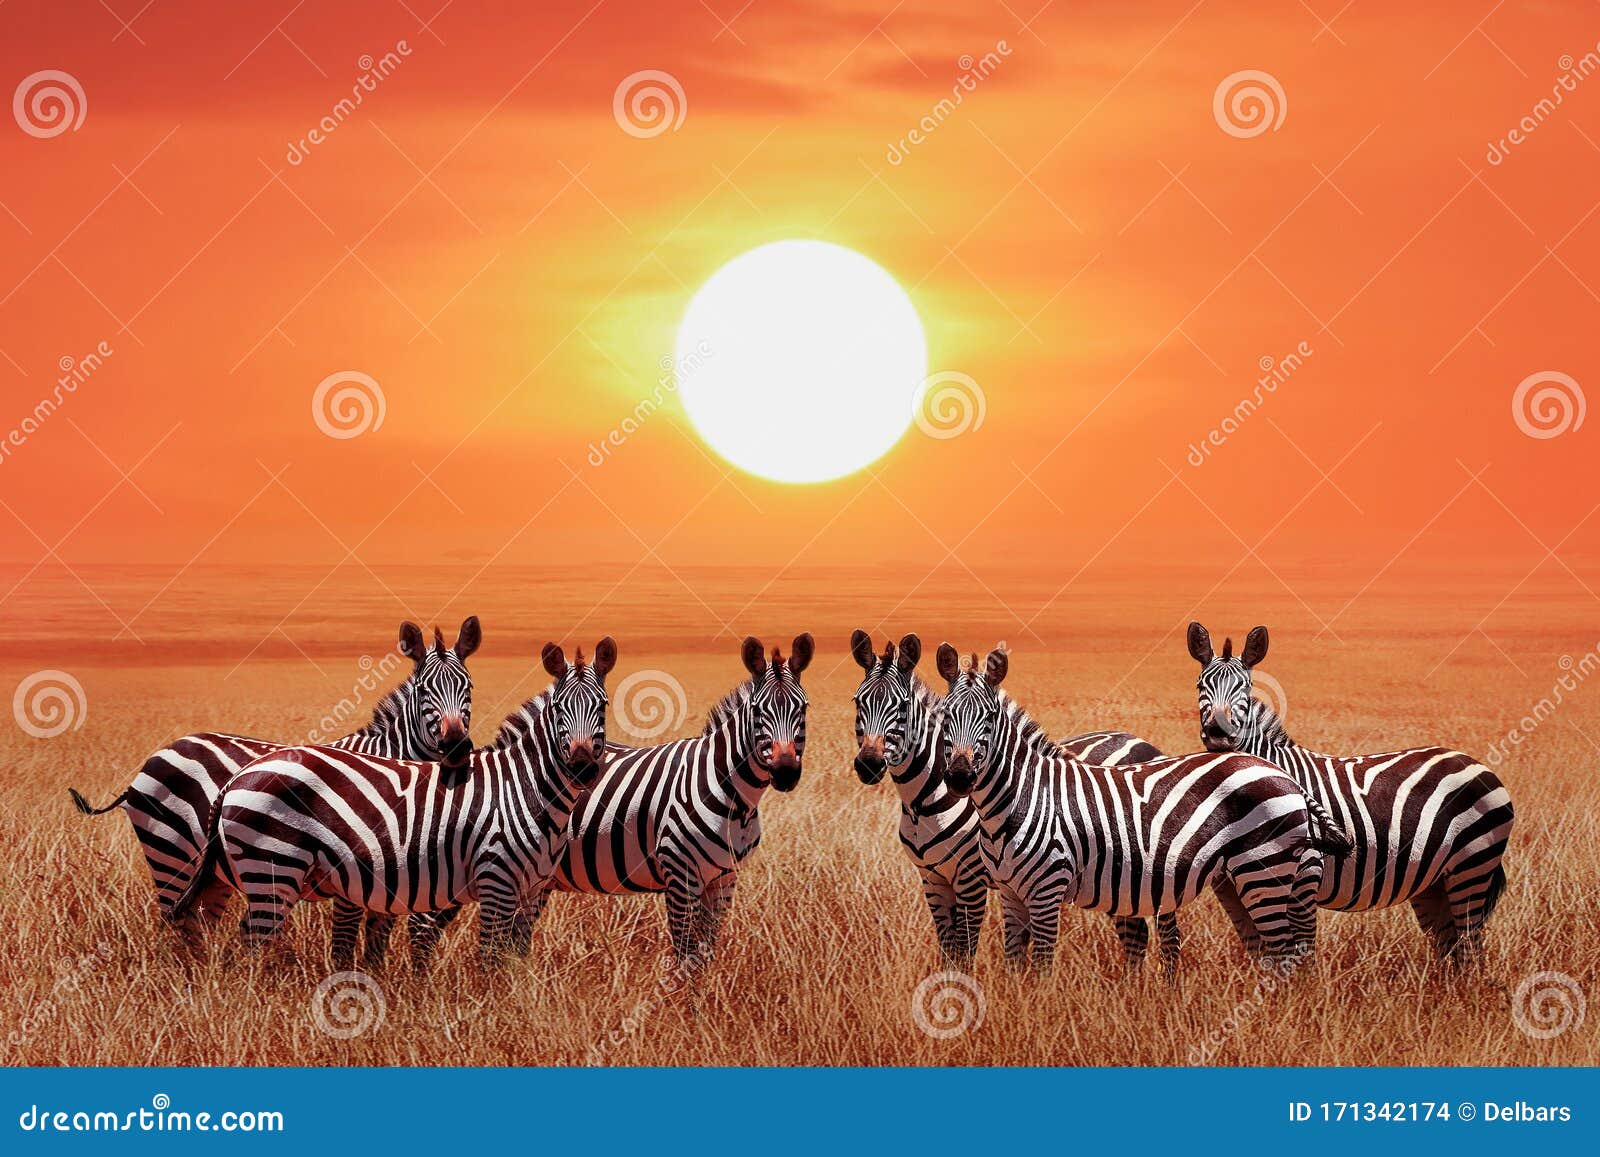 group of zebras in the african savanna against the beautiful sunset. serengeti national park. tanzania. wild life of africa.